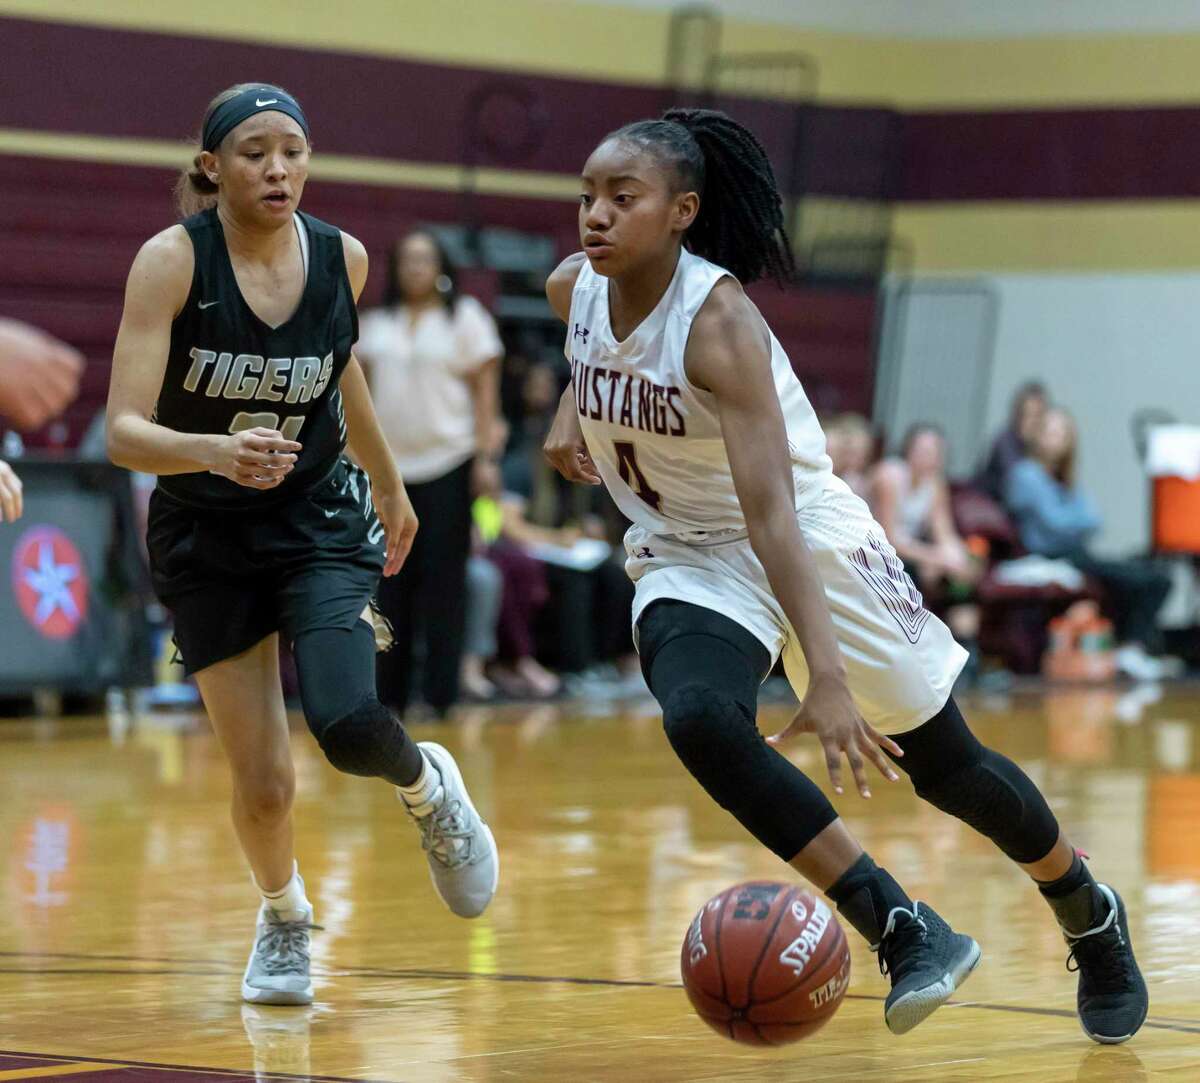 Magnolia West point guard Kamari Portalis (4) dribbles the ball towards the basket while under pressure from A&M Consolidated guard Makiya Scott (21) during the first half in a District 19-5A girls basketball game in Magnolia on Wednesday, Feb. 7, 2020.